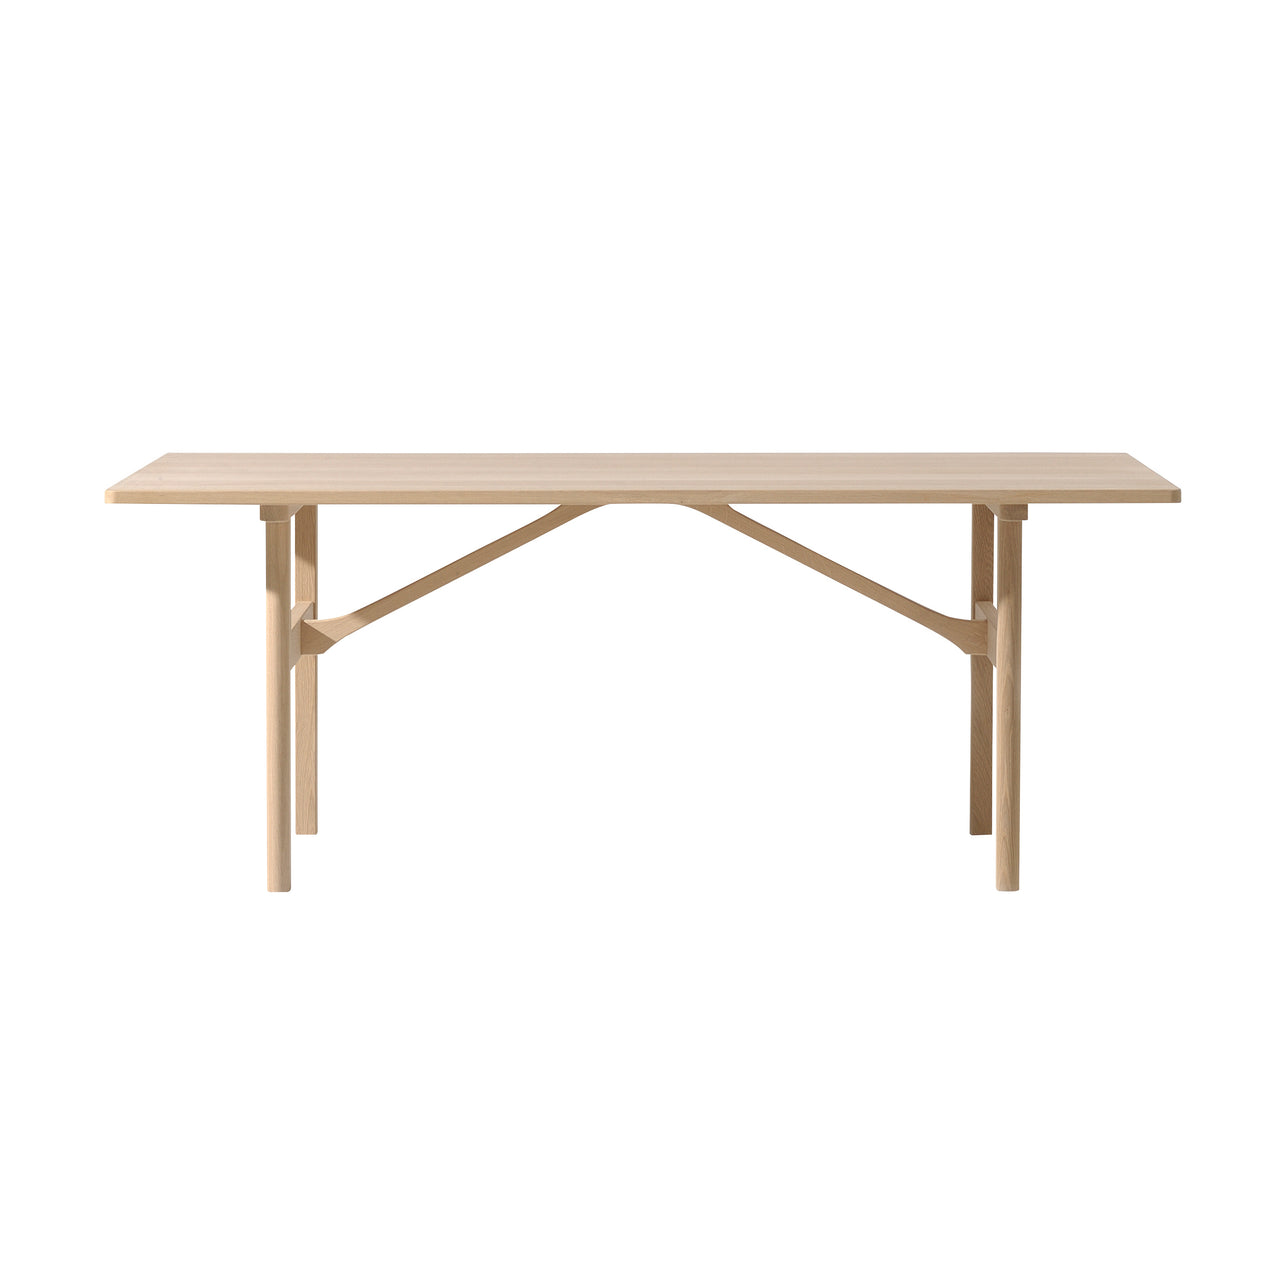 Mogensen 6284 Dining Table: Soaped Treated Oak + Without Leaf